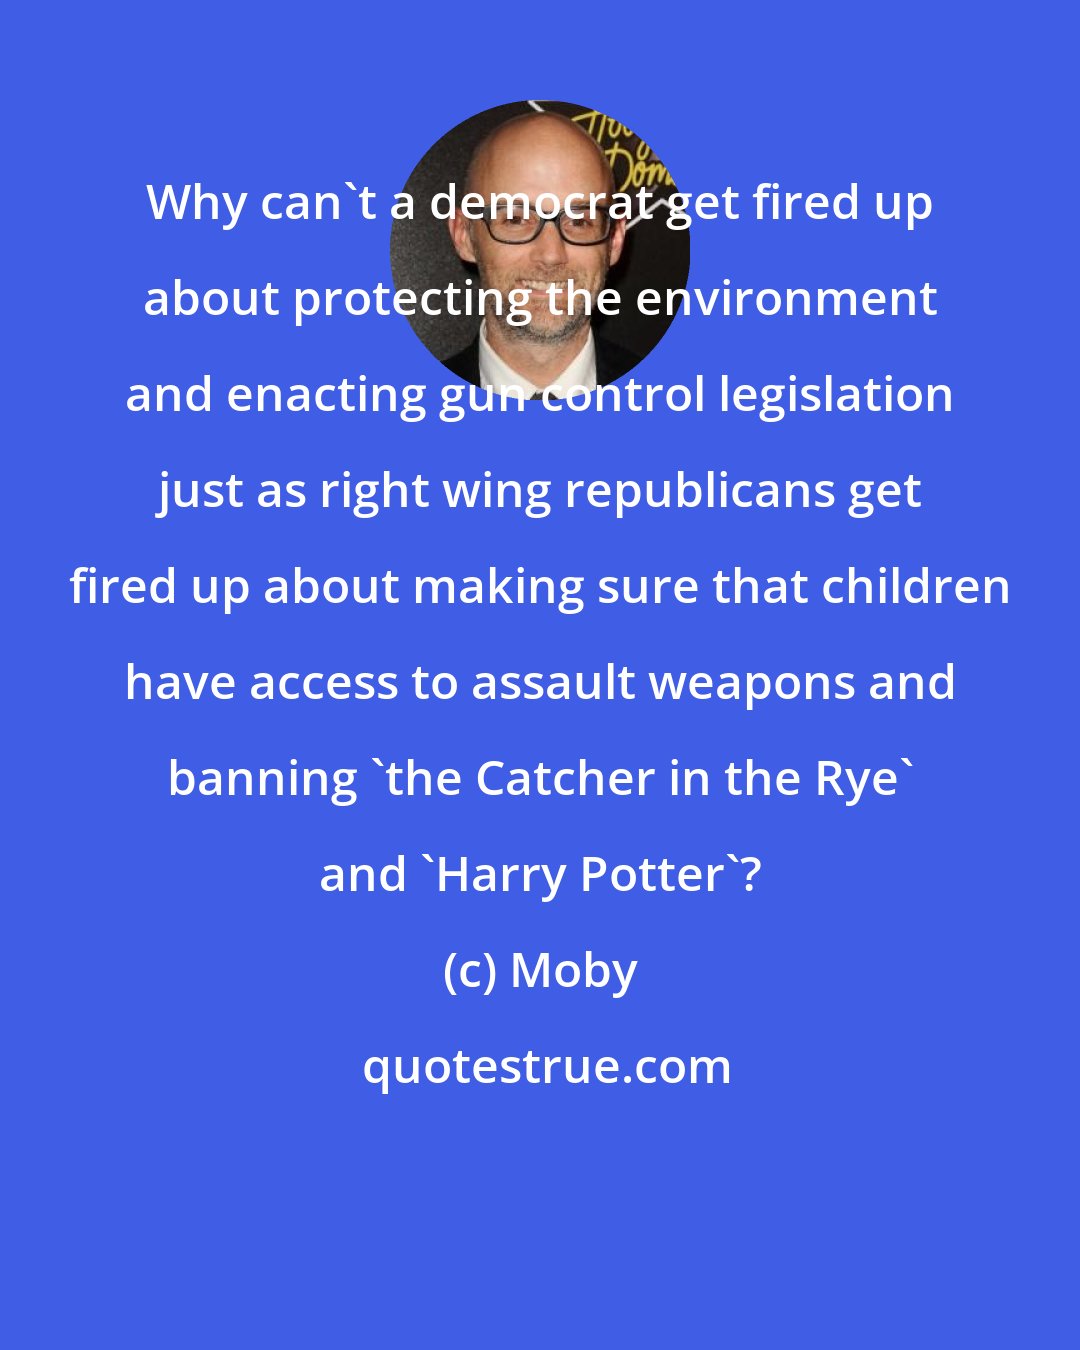 Moby: Why can't a democrat get fired up about protecting the environment and enacting gun control legislation just as right wing republicans get fired up about making sure that children have access to assault weapons and banning 'the Catcher in the Rye' and 'Harry Potter'?